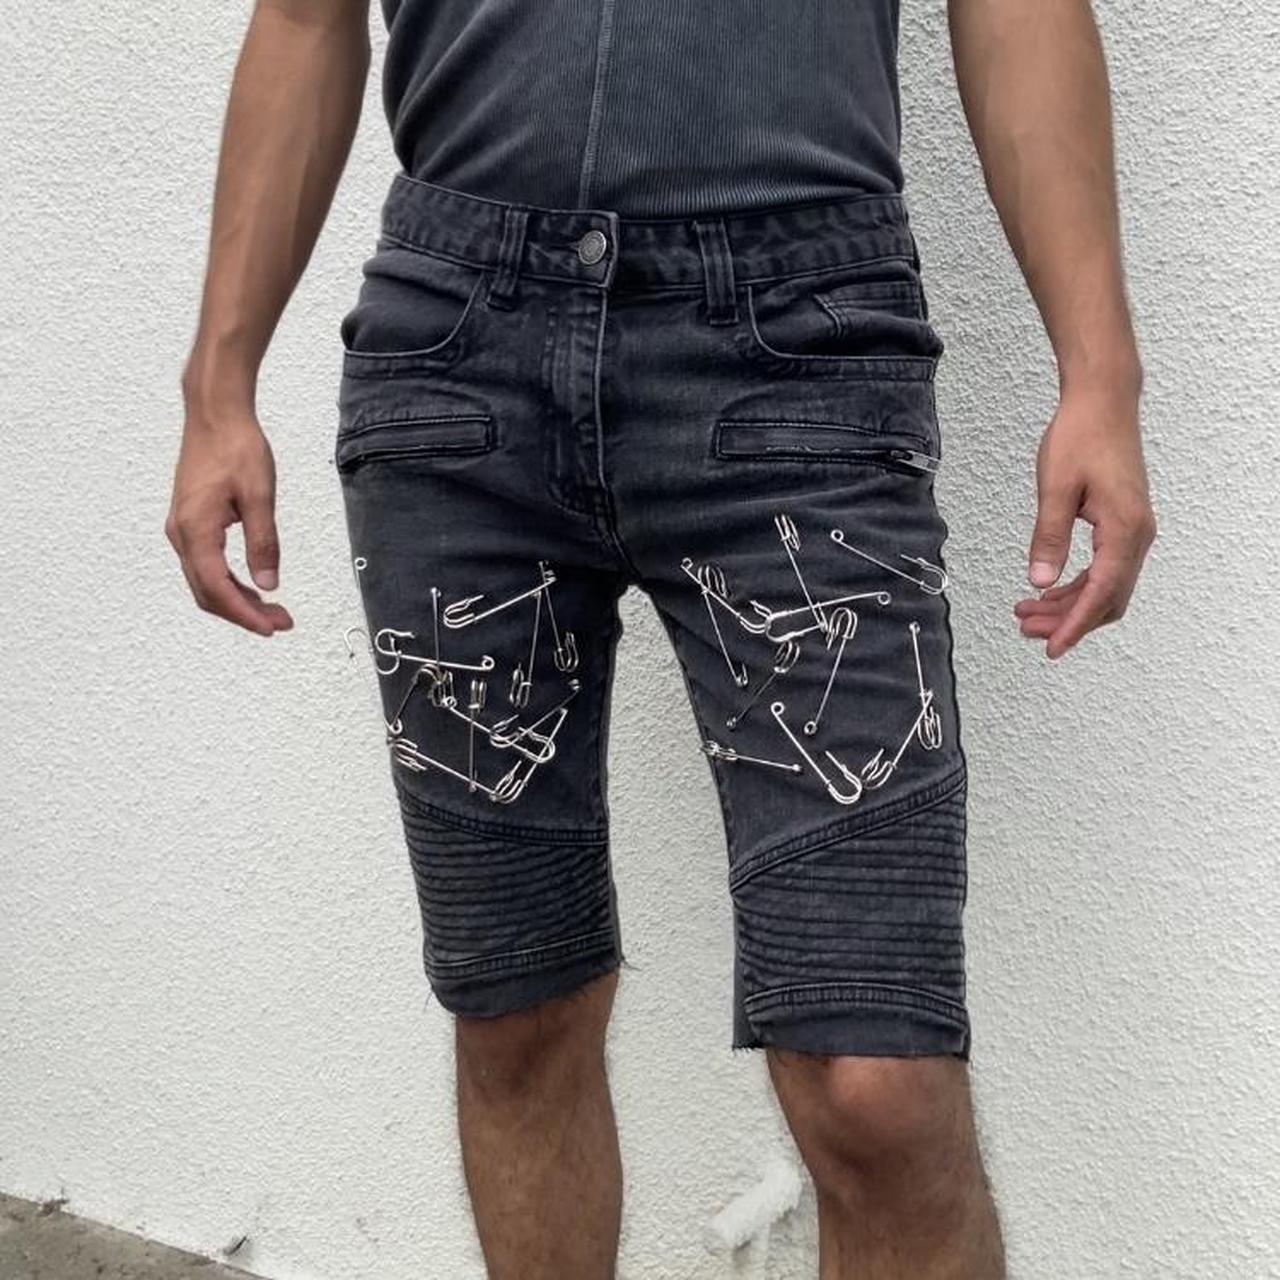 Pin on jeans and shorts